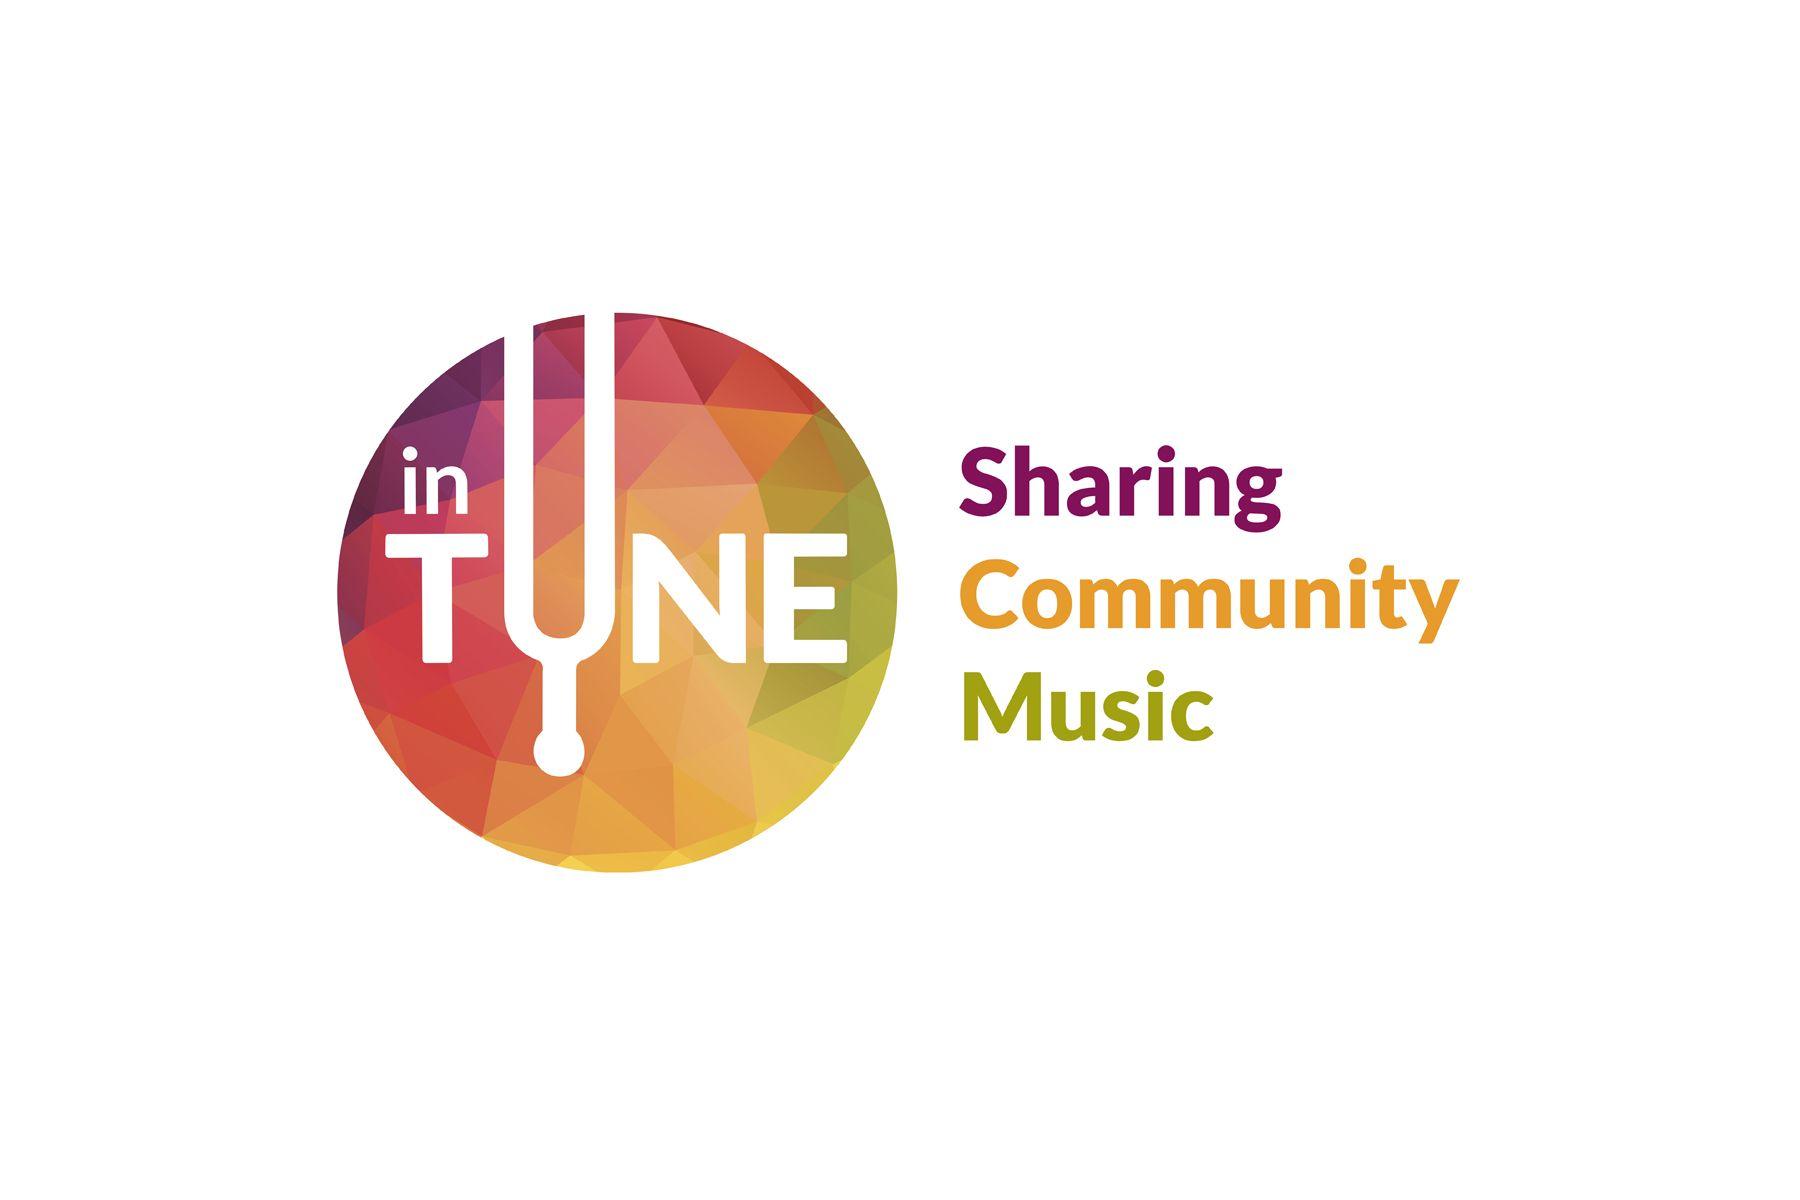 Intune Logo - inTUNE a cross cultural community music project. Logo by Lee Mason ...